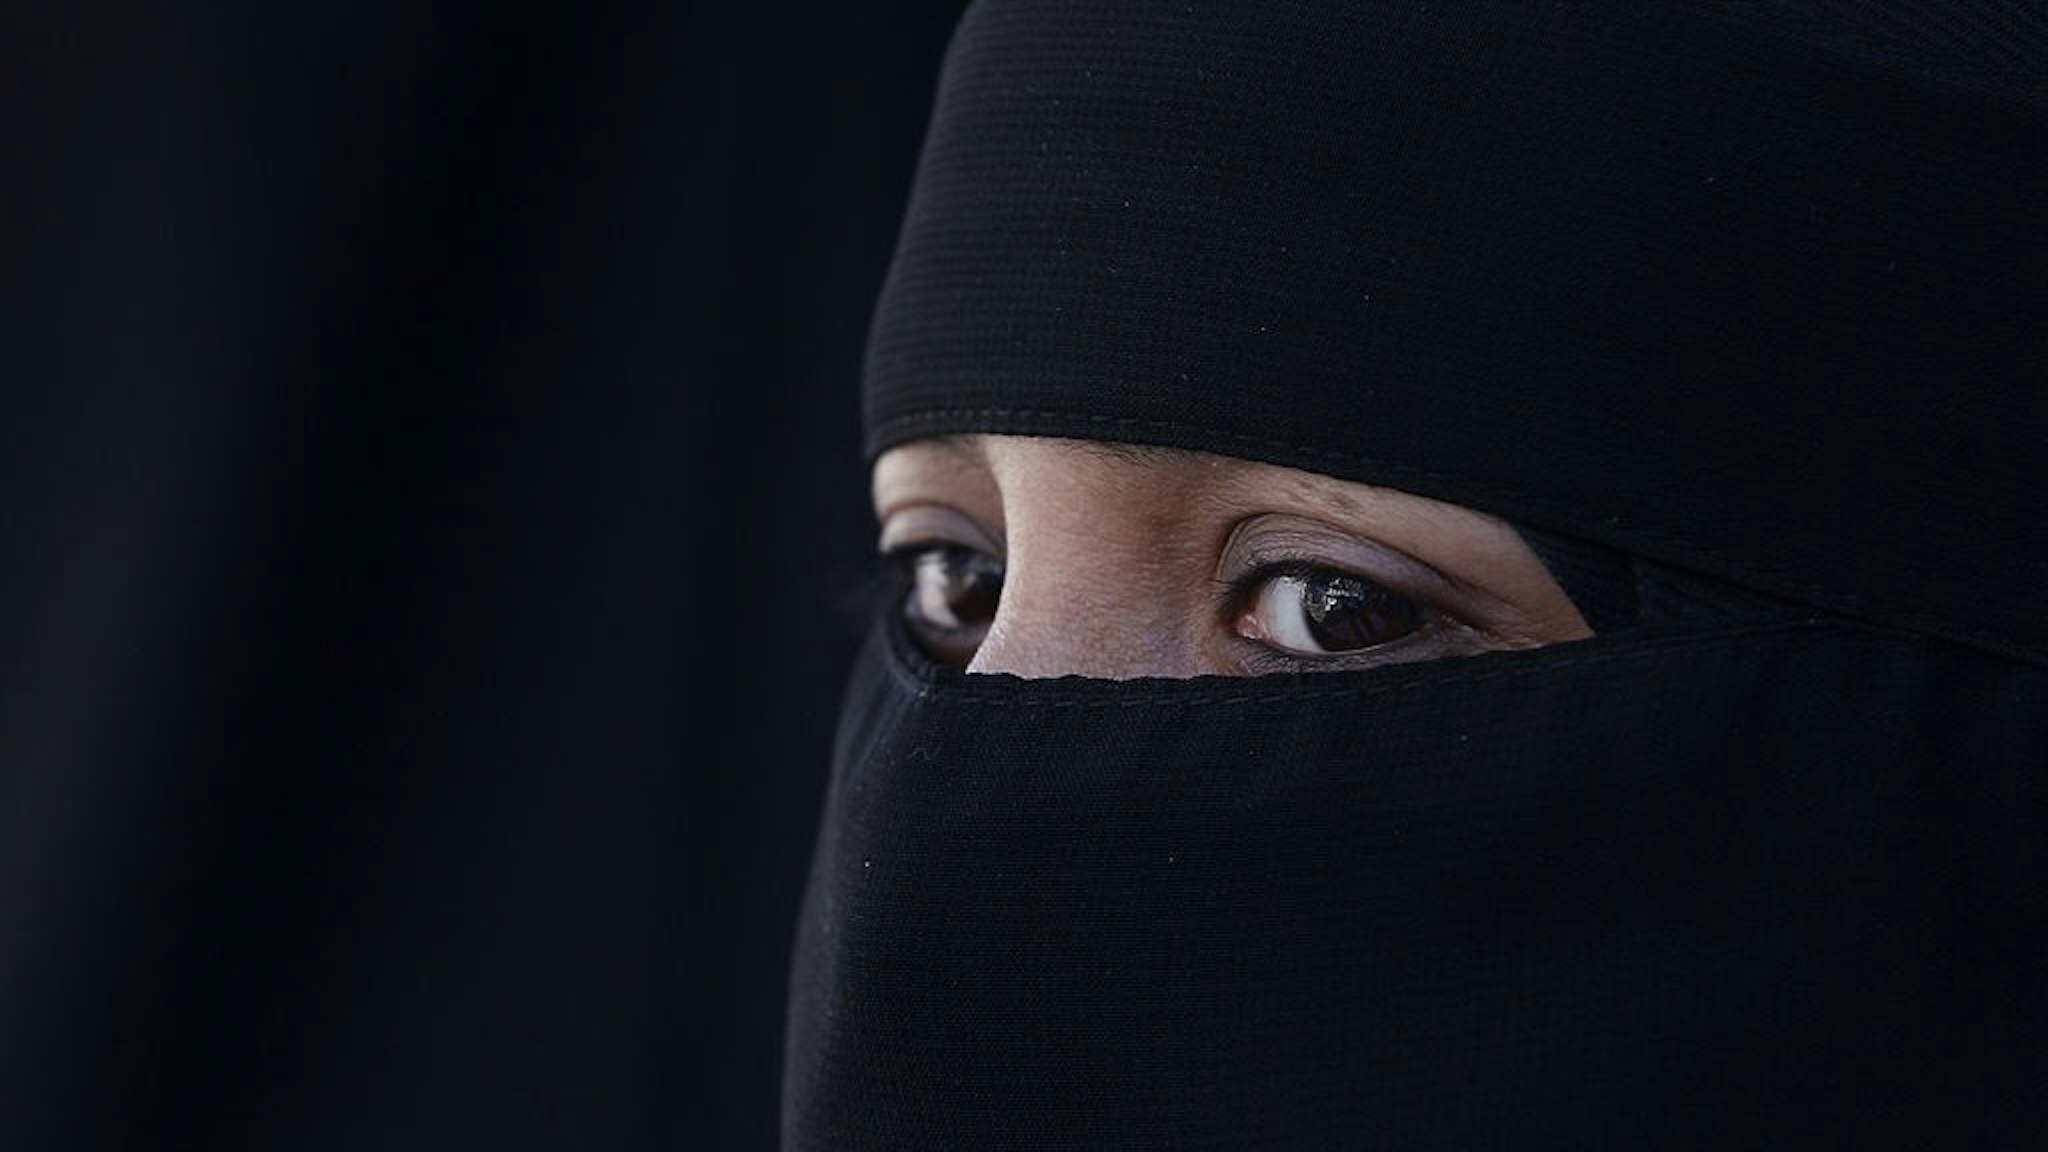 LONDON, ENGLAND - APRIL 11: A woman wears an Islamic niqab veil stands outside the French Embassy during a demonstration on April 11, 2011 in London, England. France has become the first country in Europe to ban the wearing of the veil and in Paris two women have been detained by police under the new law. (Photo by Peter Macdiarmid/Getty Images)